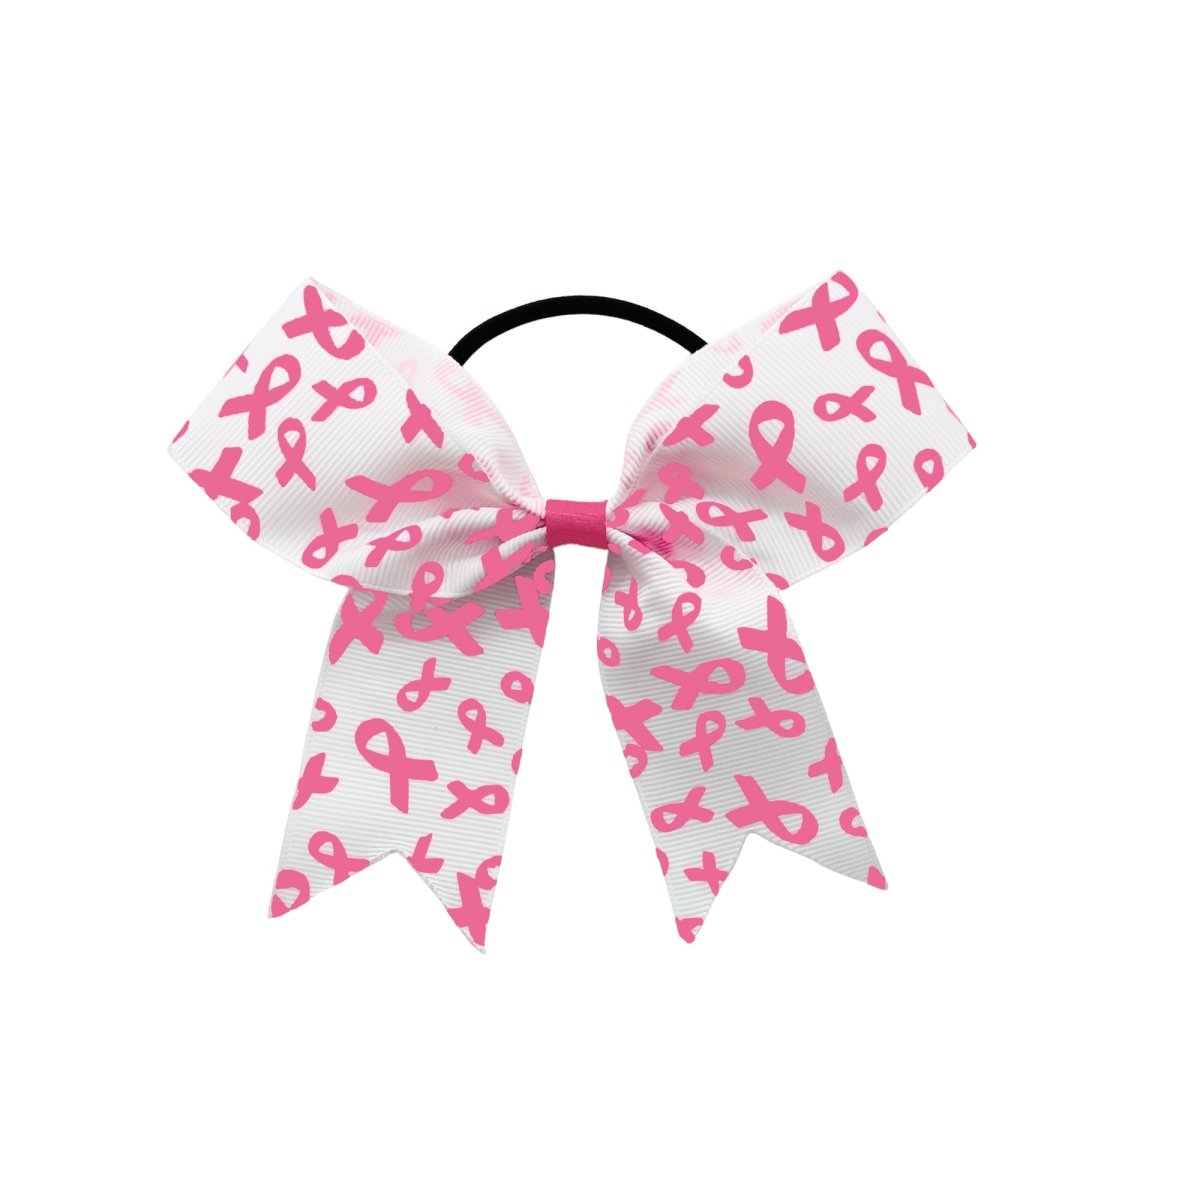 25 Breast Cancer Pink Ribbon Hair Bows by Fundraising For A Cause